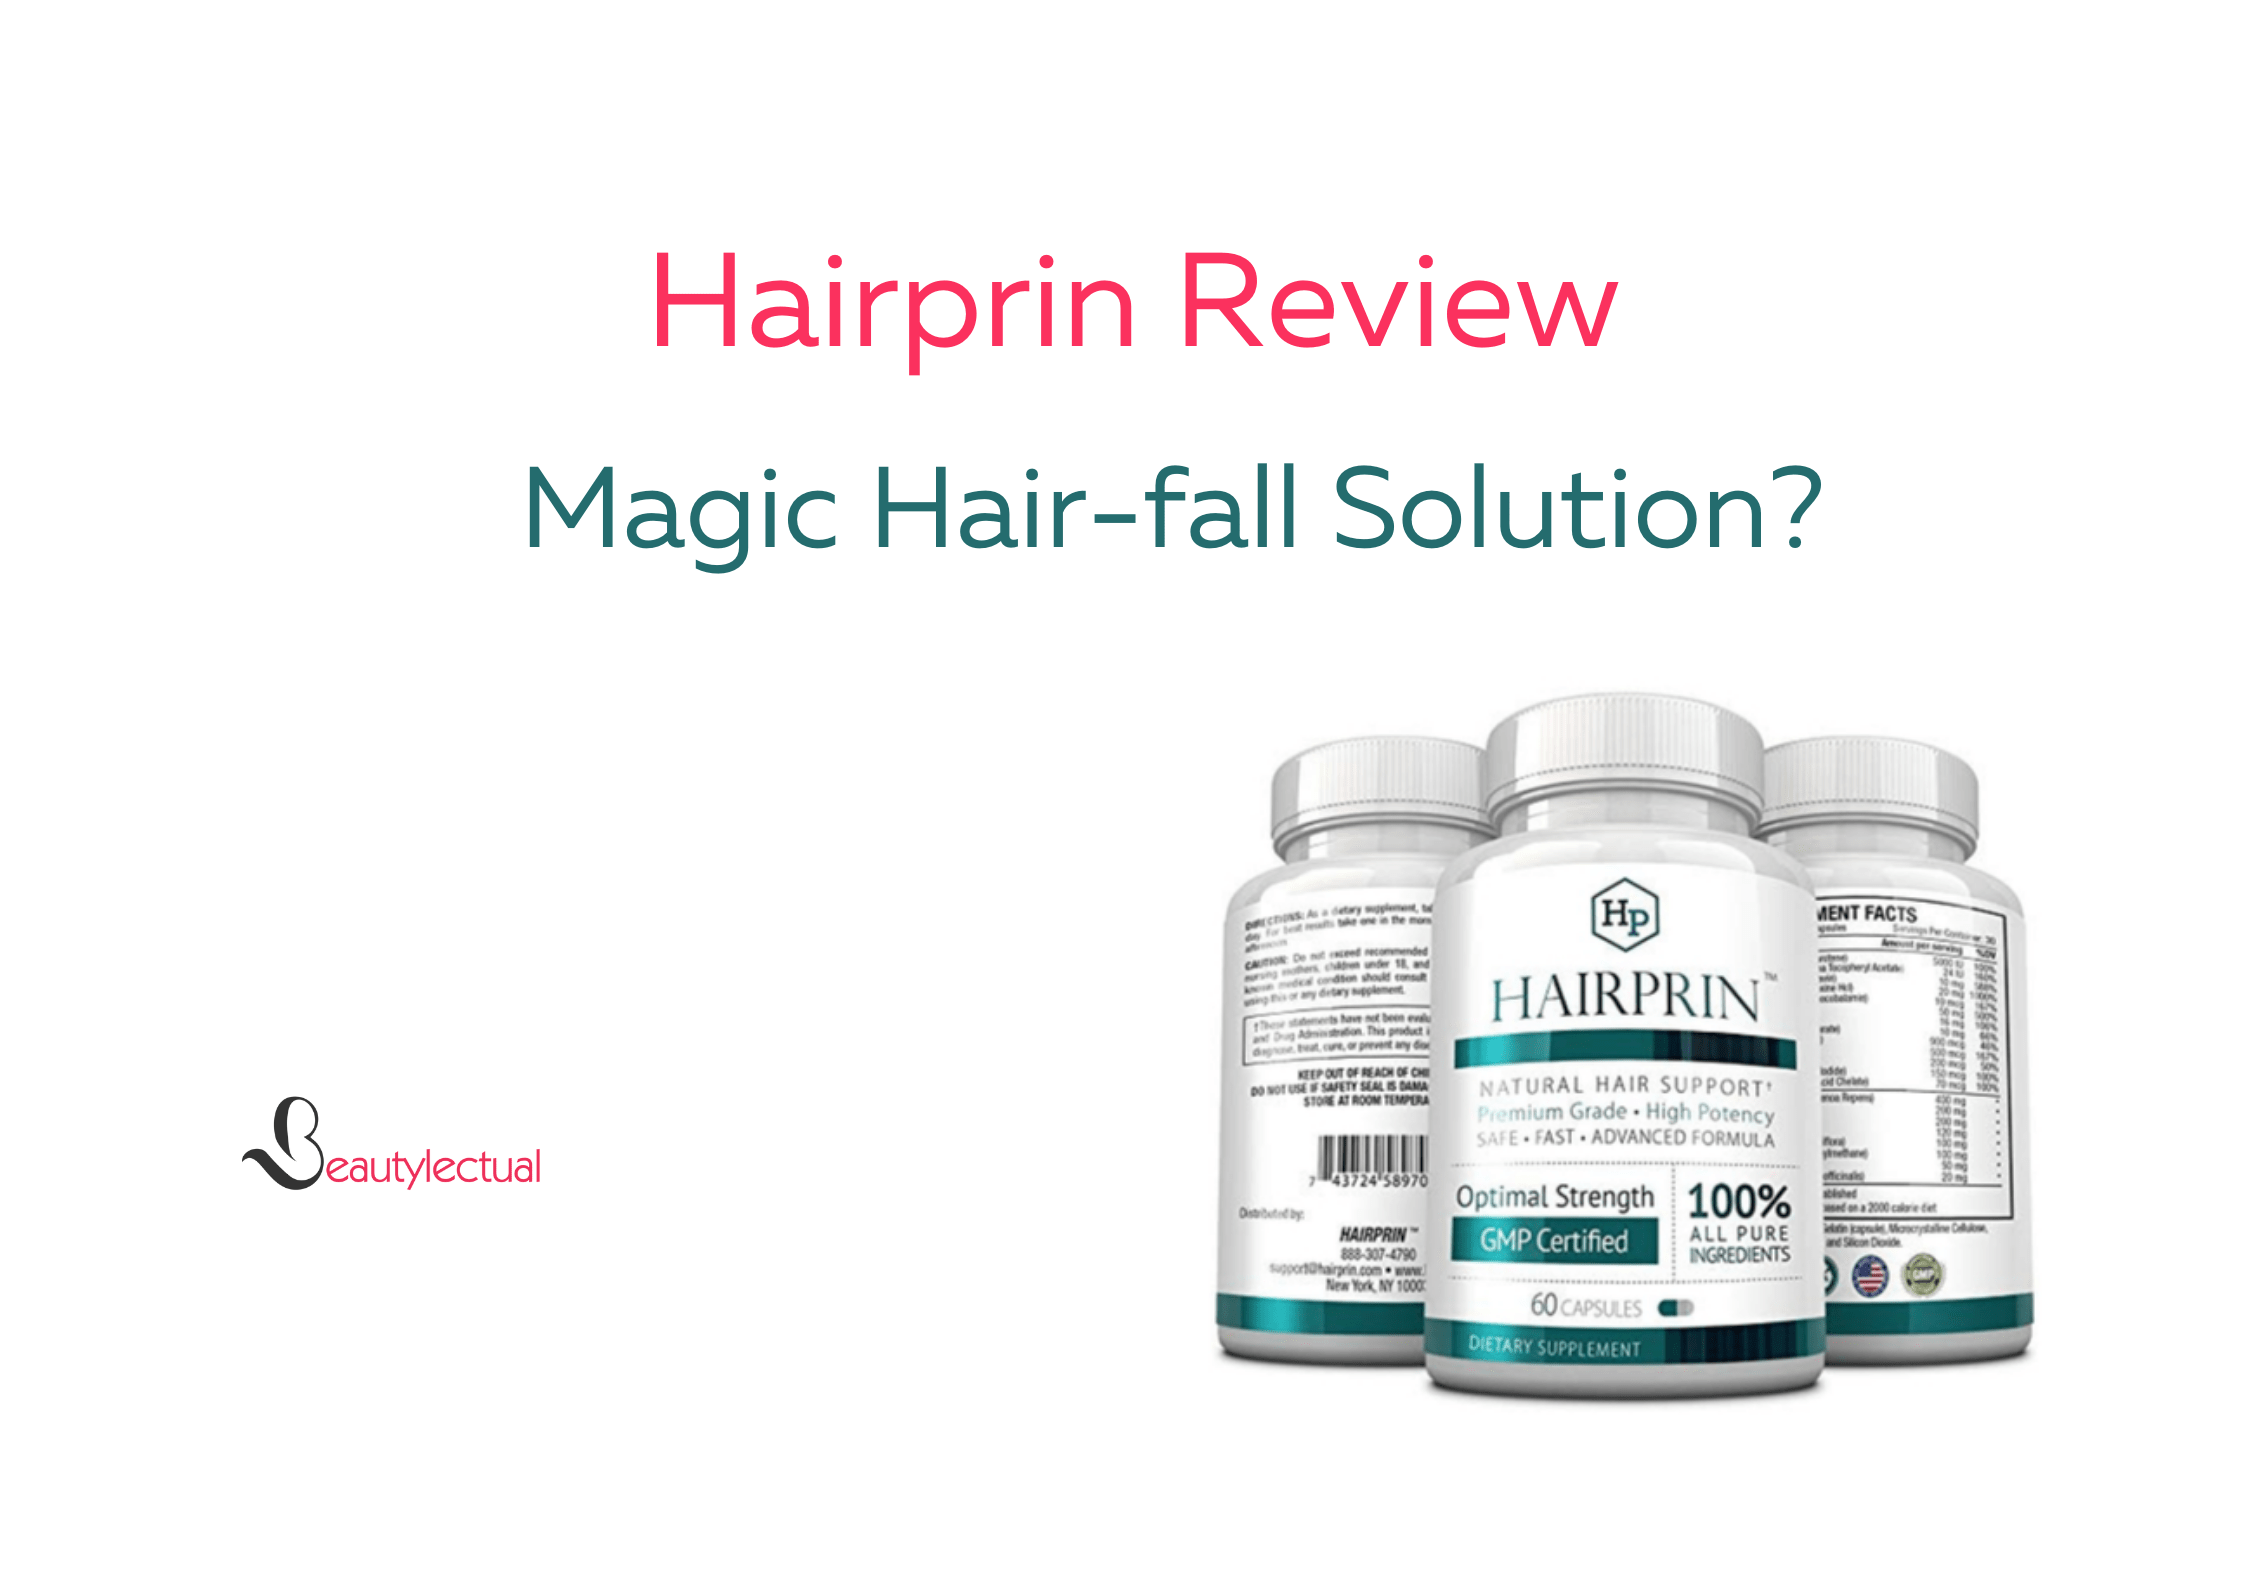 Hairprin Review